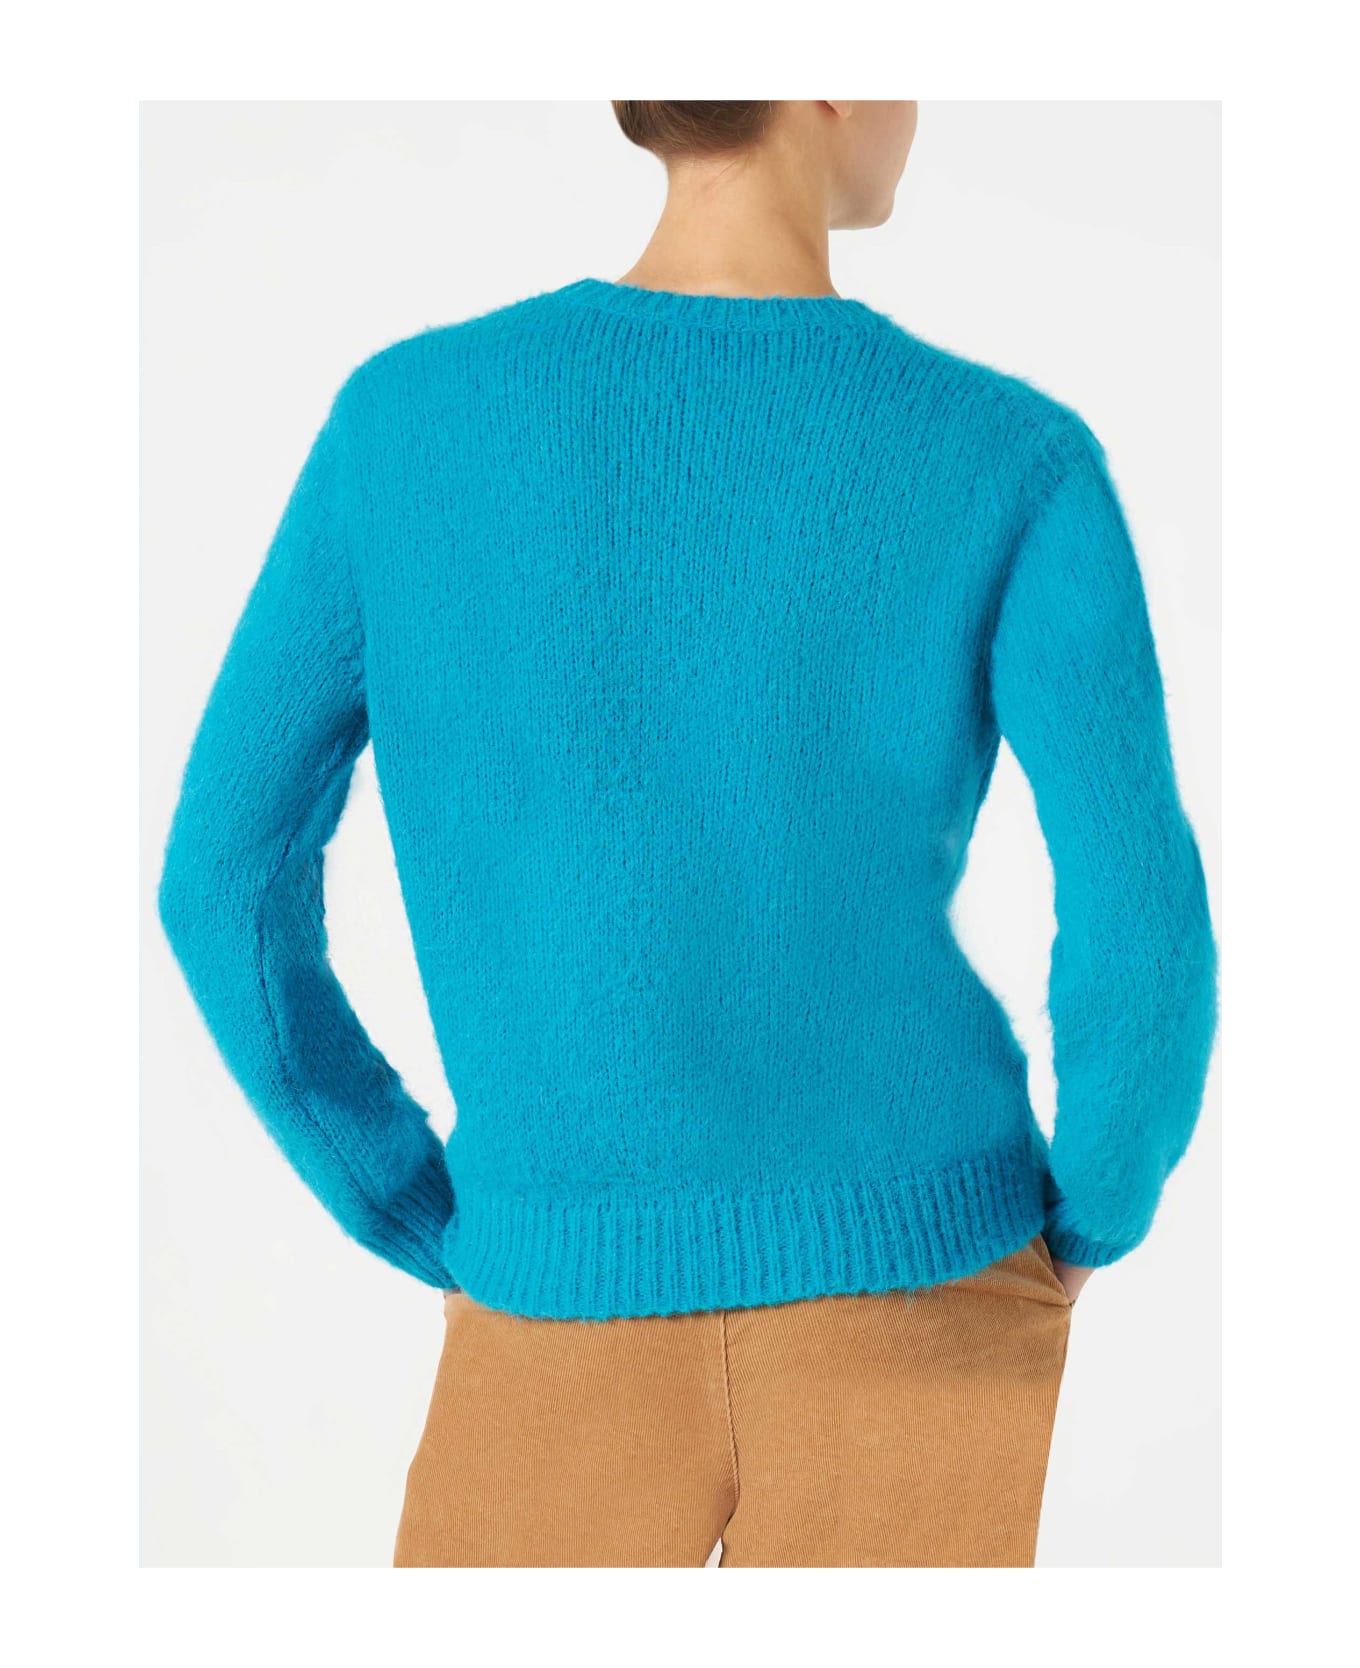 MC2 Saint Barth Woman Light Blue Brushed Sweater With Embroidery - BLUE ニットウェア